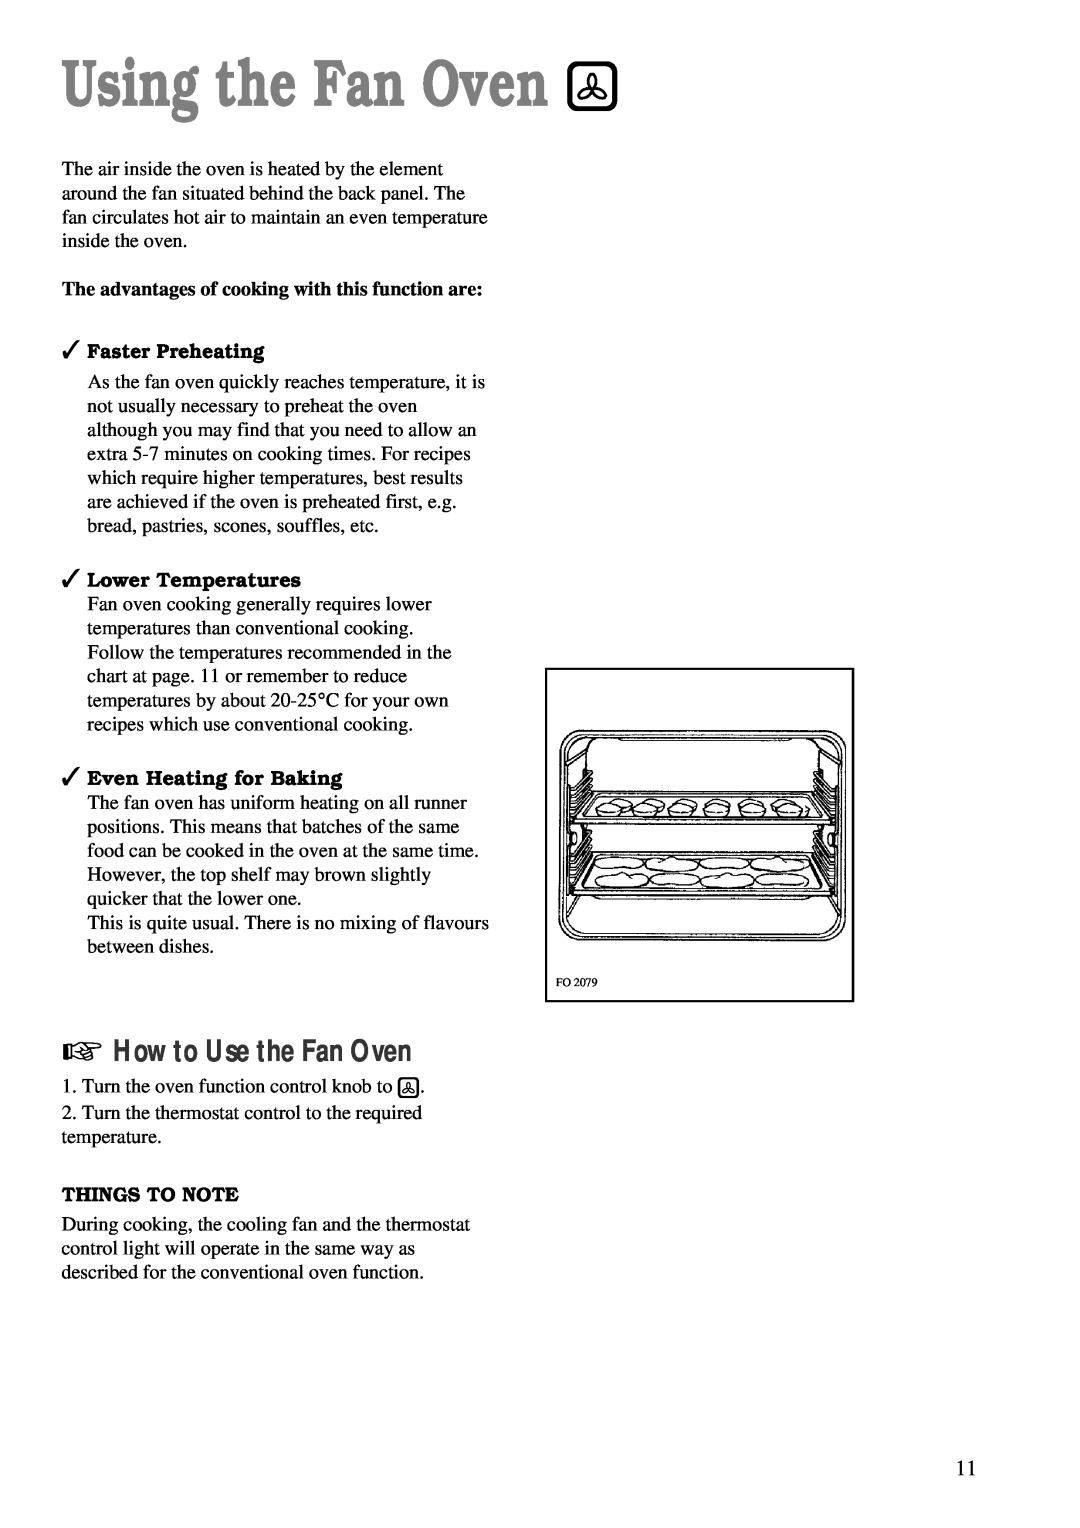 Zanussi ZBC 748 Using the Fan Oven, How to Use the Fan Oven, Lower Temperatures, Even Heating for Baking, Things To Note 